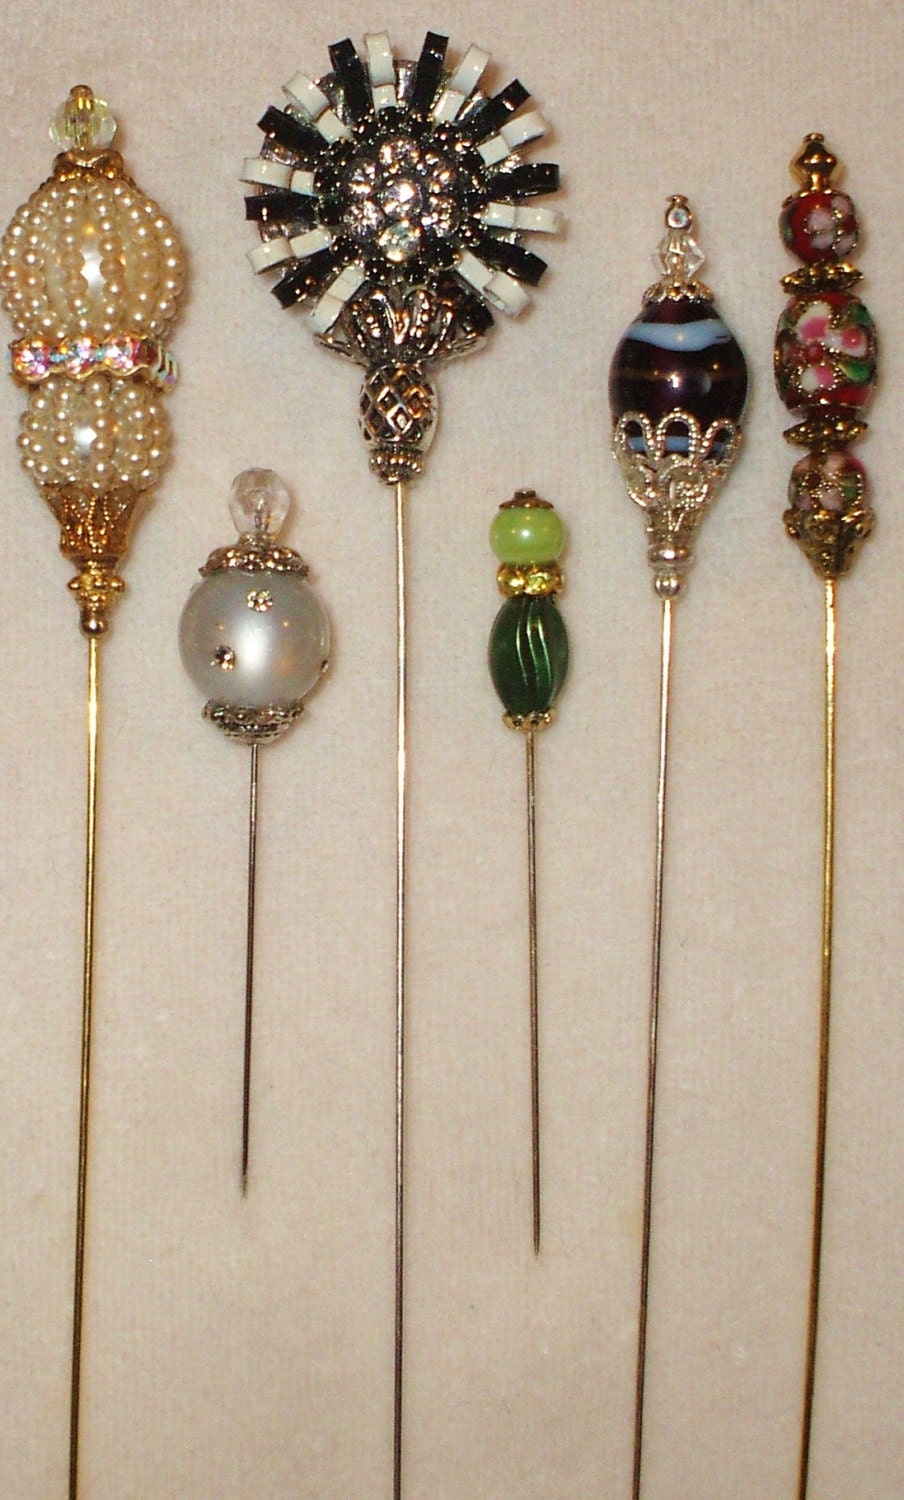 6 Antique style Victorian Hat Pins with vintage and antique